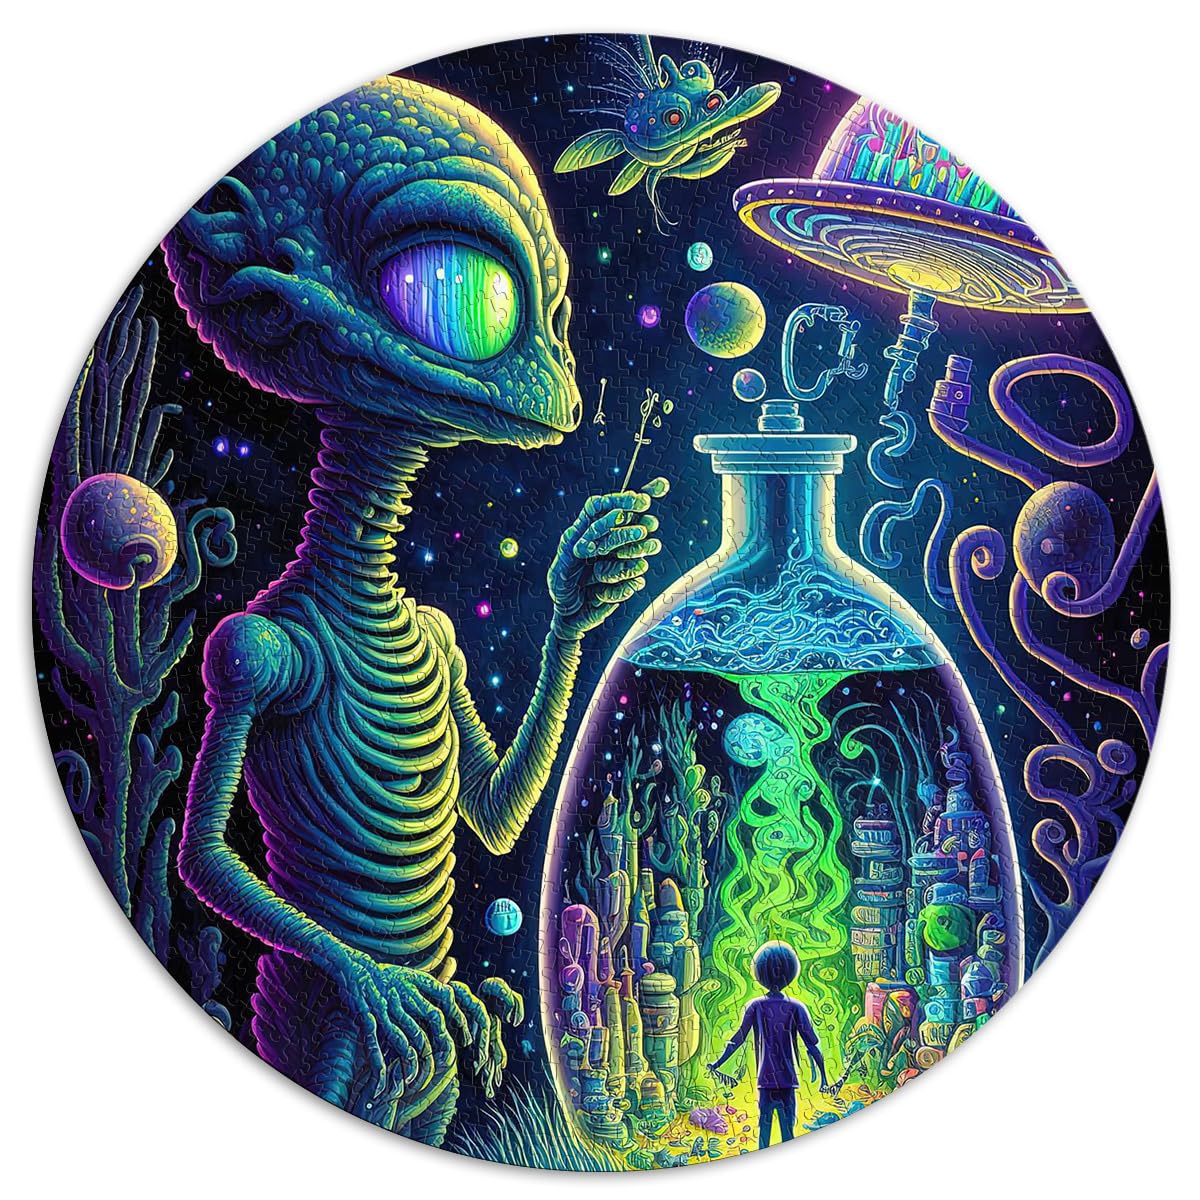 Puzzle | Jigsaws 1000 Pieces for Adults Alien Monster Round Jigsaw Puzzle Gift Cardboard Puzzle 26.5x26.5inch